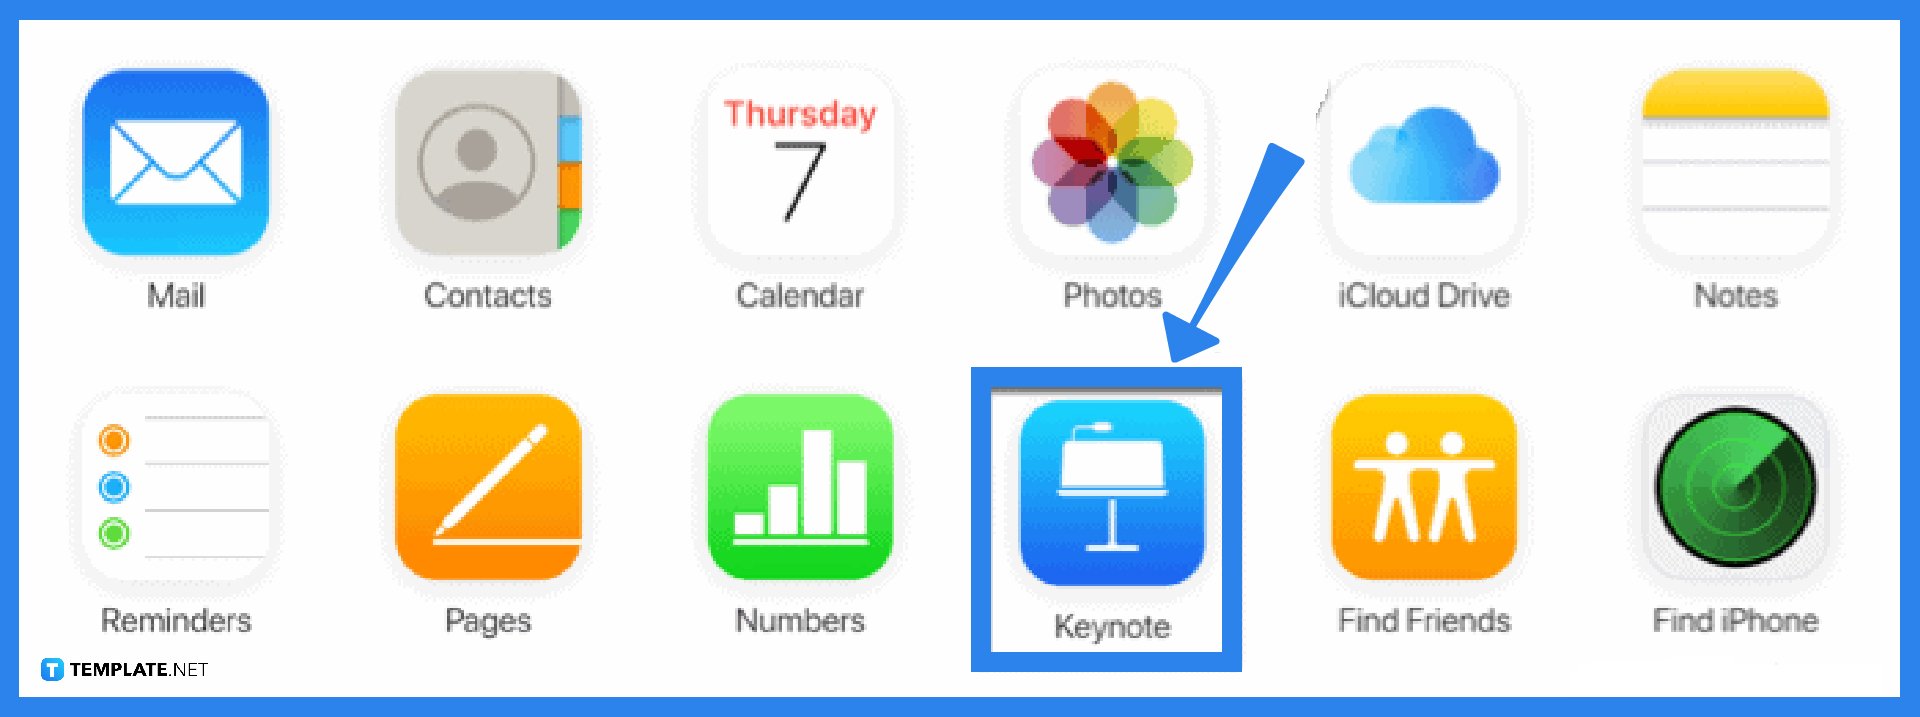 how-to-convert-apple-keynote-to-microsoft-powerpoint-step-1